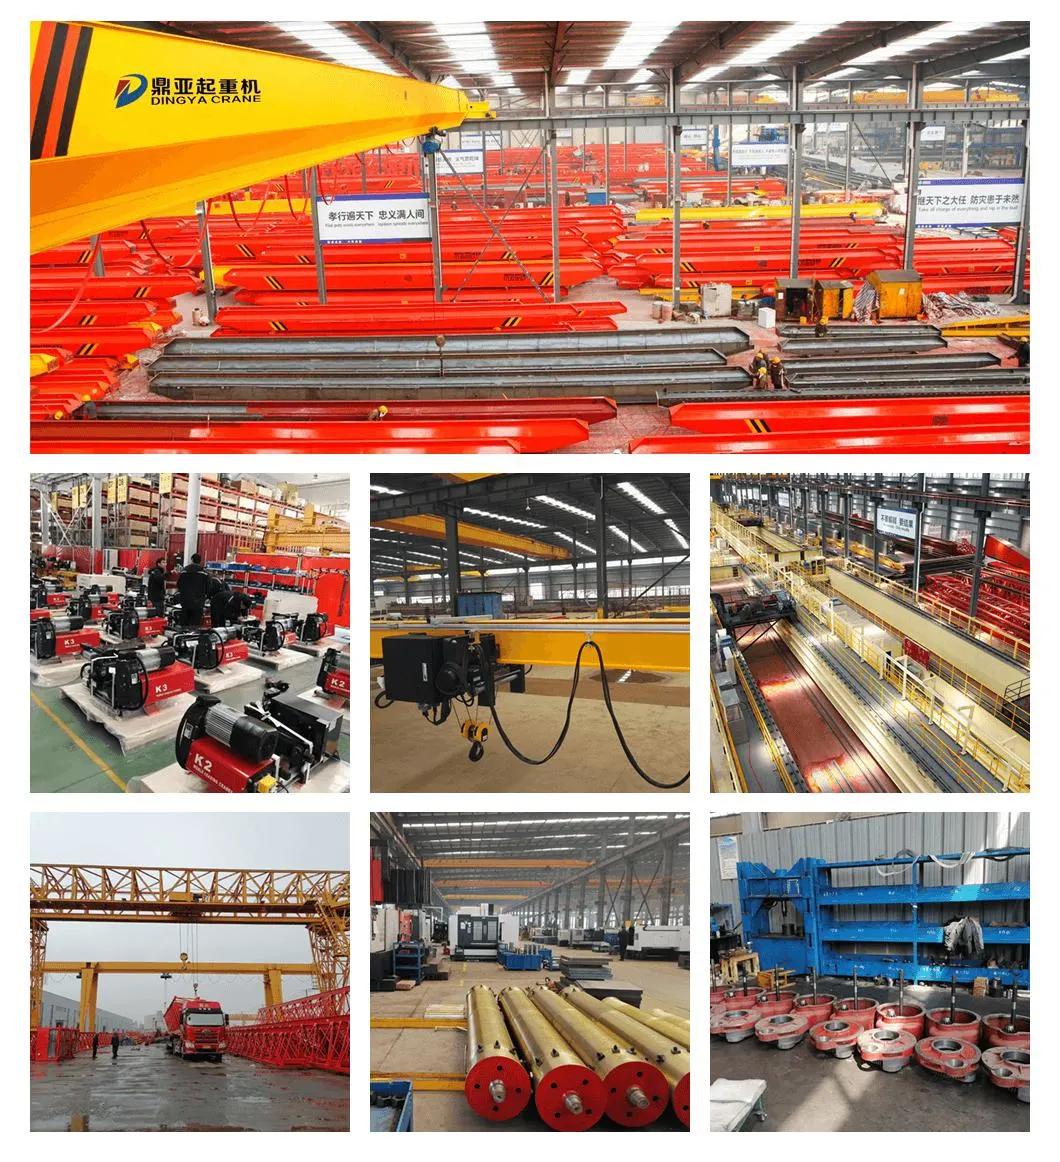 Dy Customized Frequency Conversion Double Girder Electric Overhead Crane Price